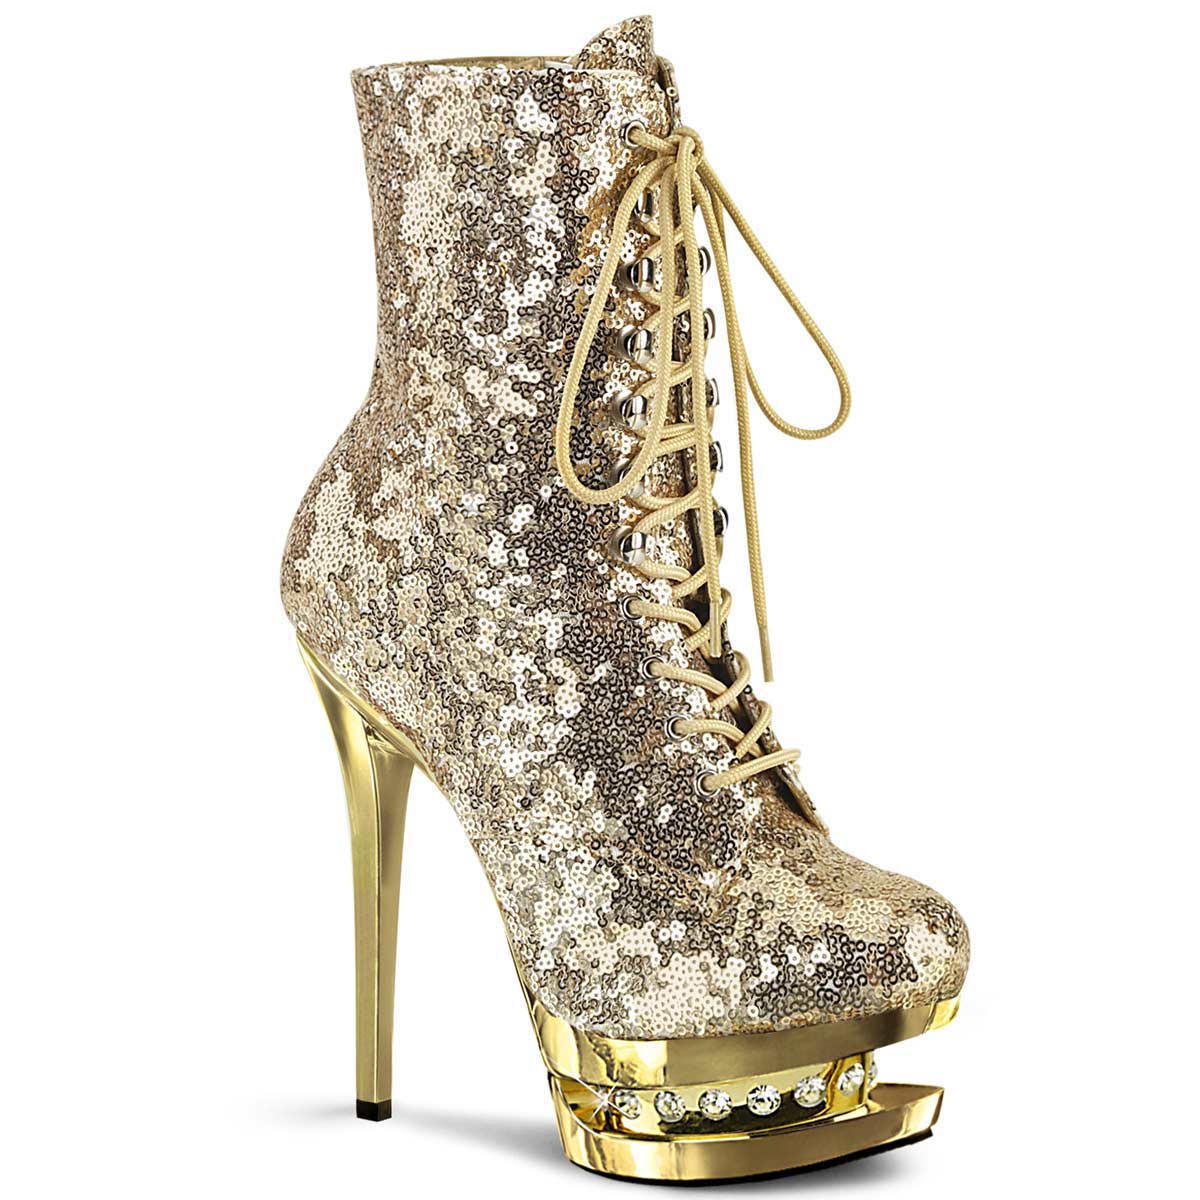 Pleaser Blondie-R-1020 - Gold Sequins Chrome in Sexy Boots - $63.35